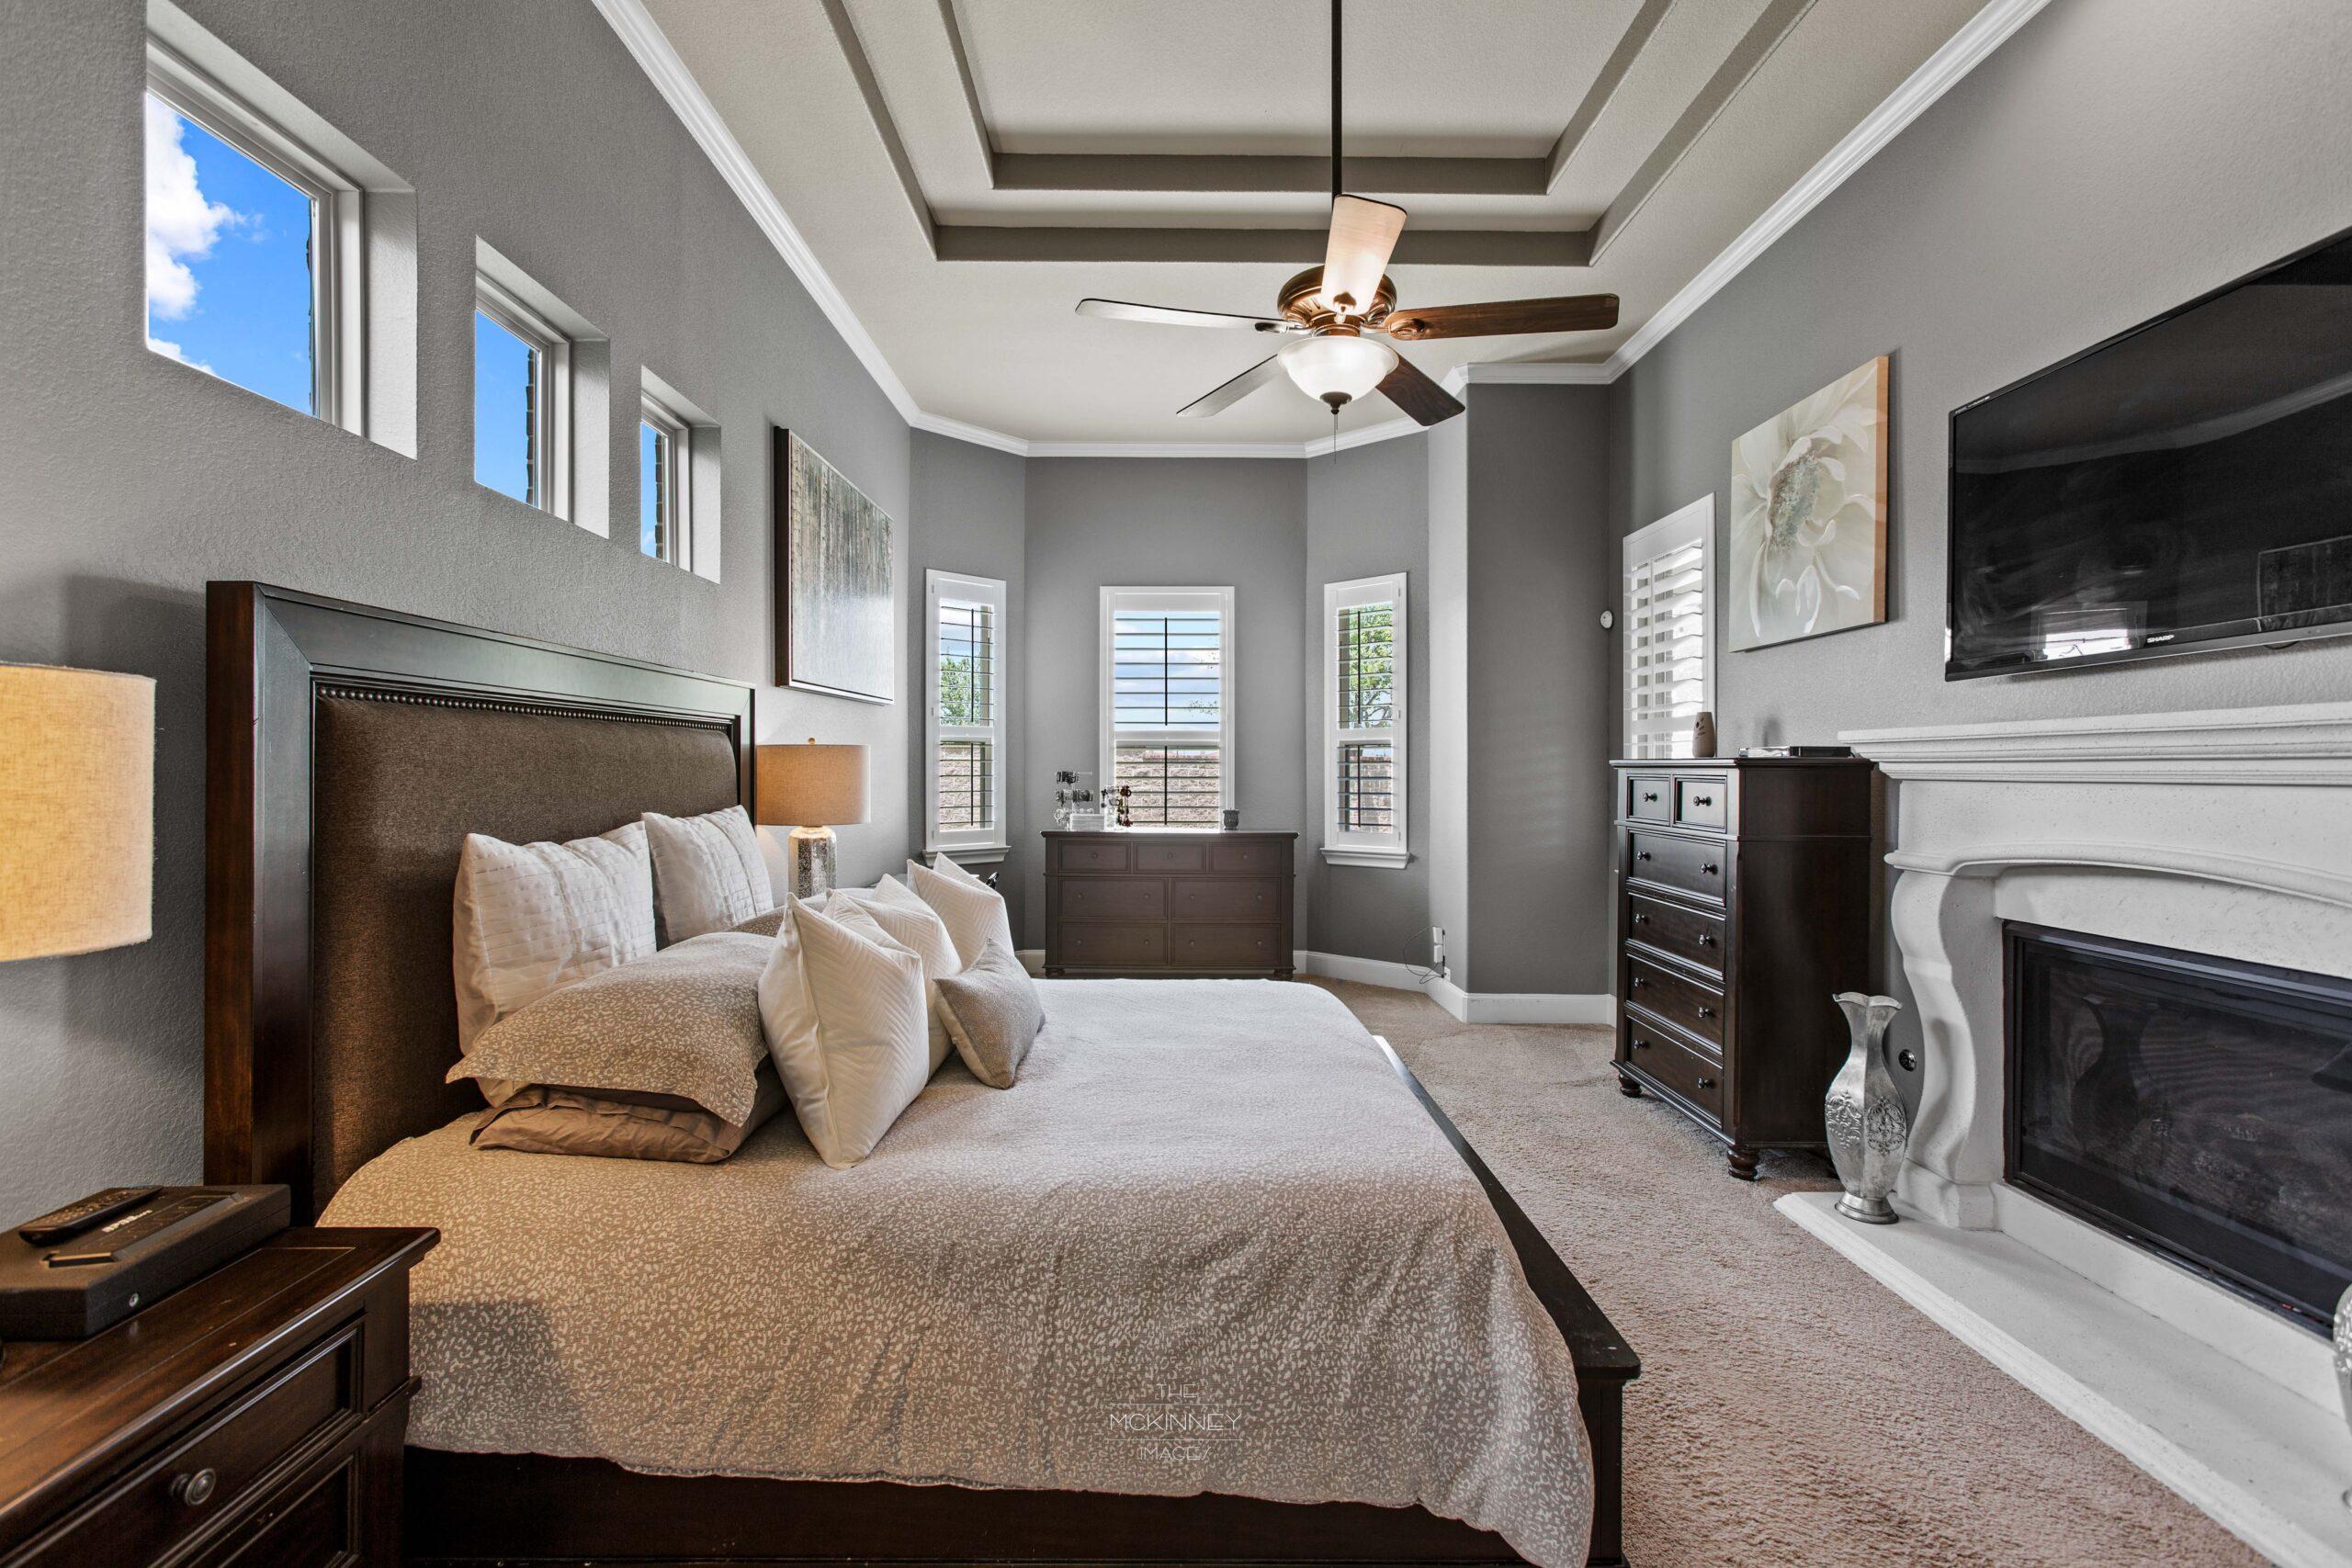 Real Estate Photography - The McKinney Images